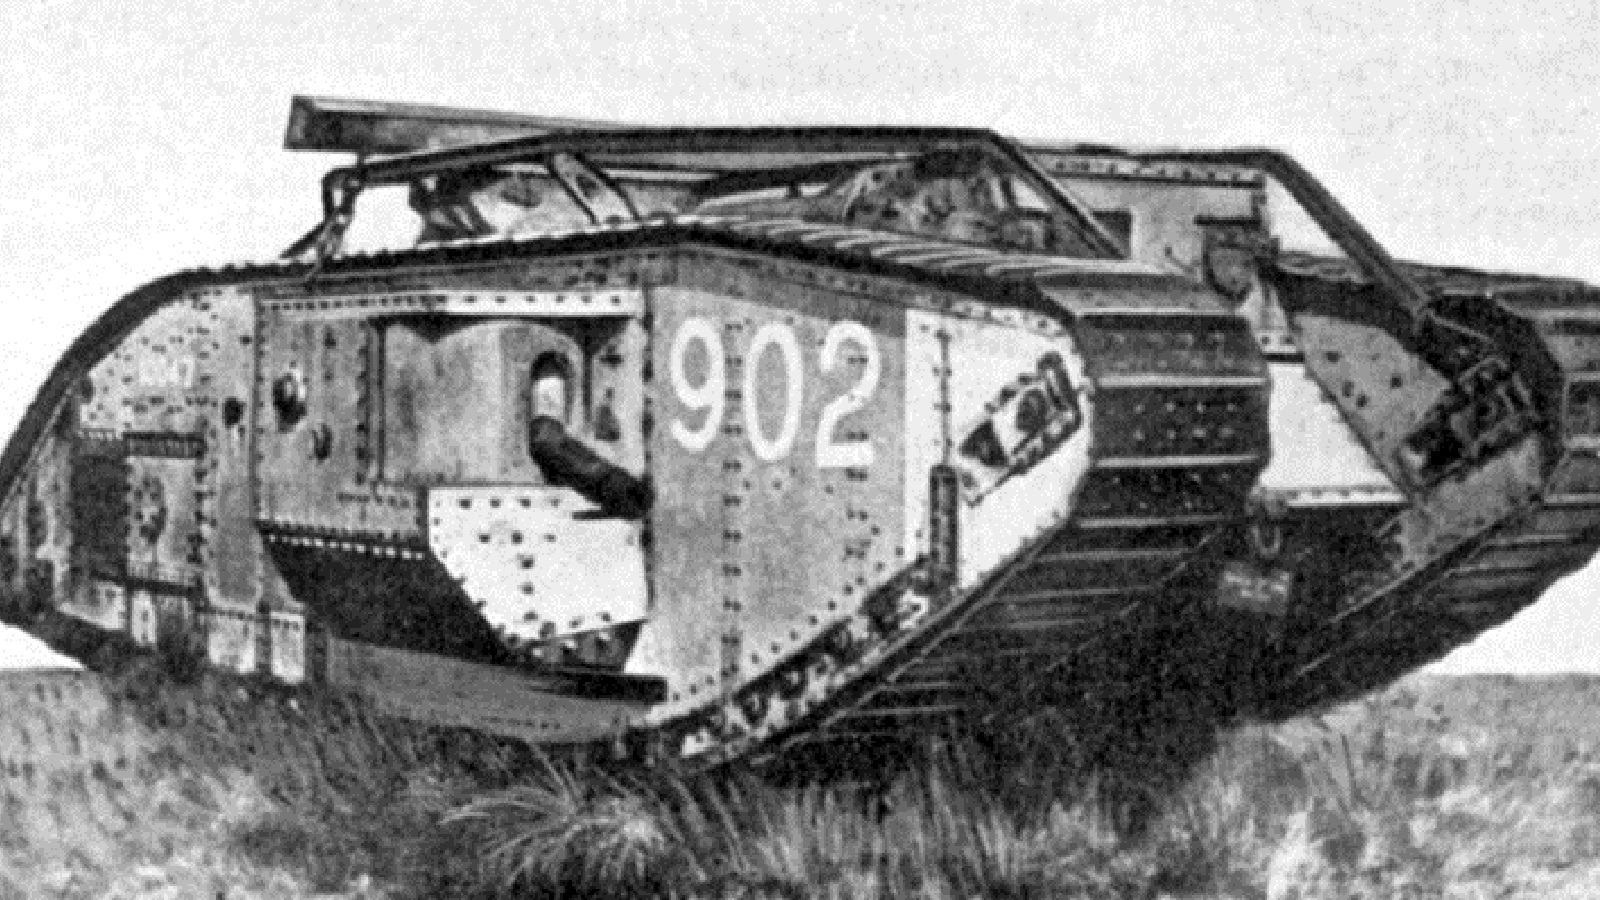 First tank produced, September 6, 1915